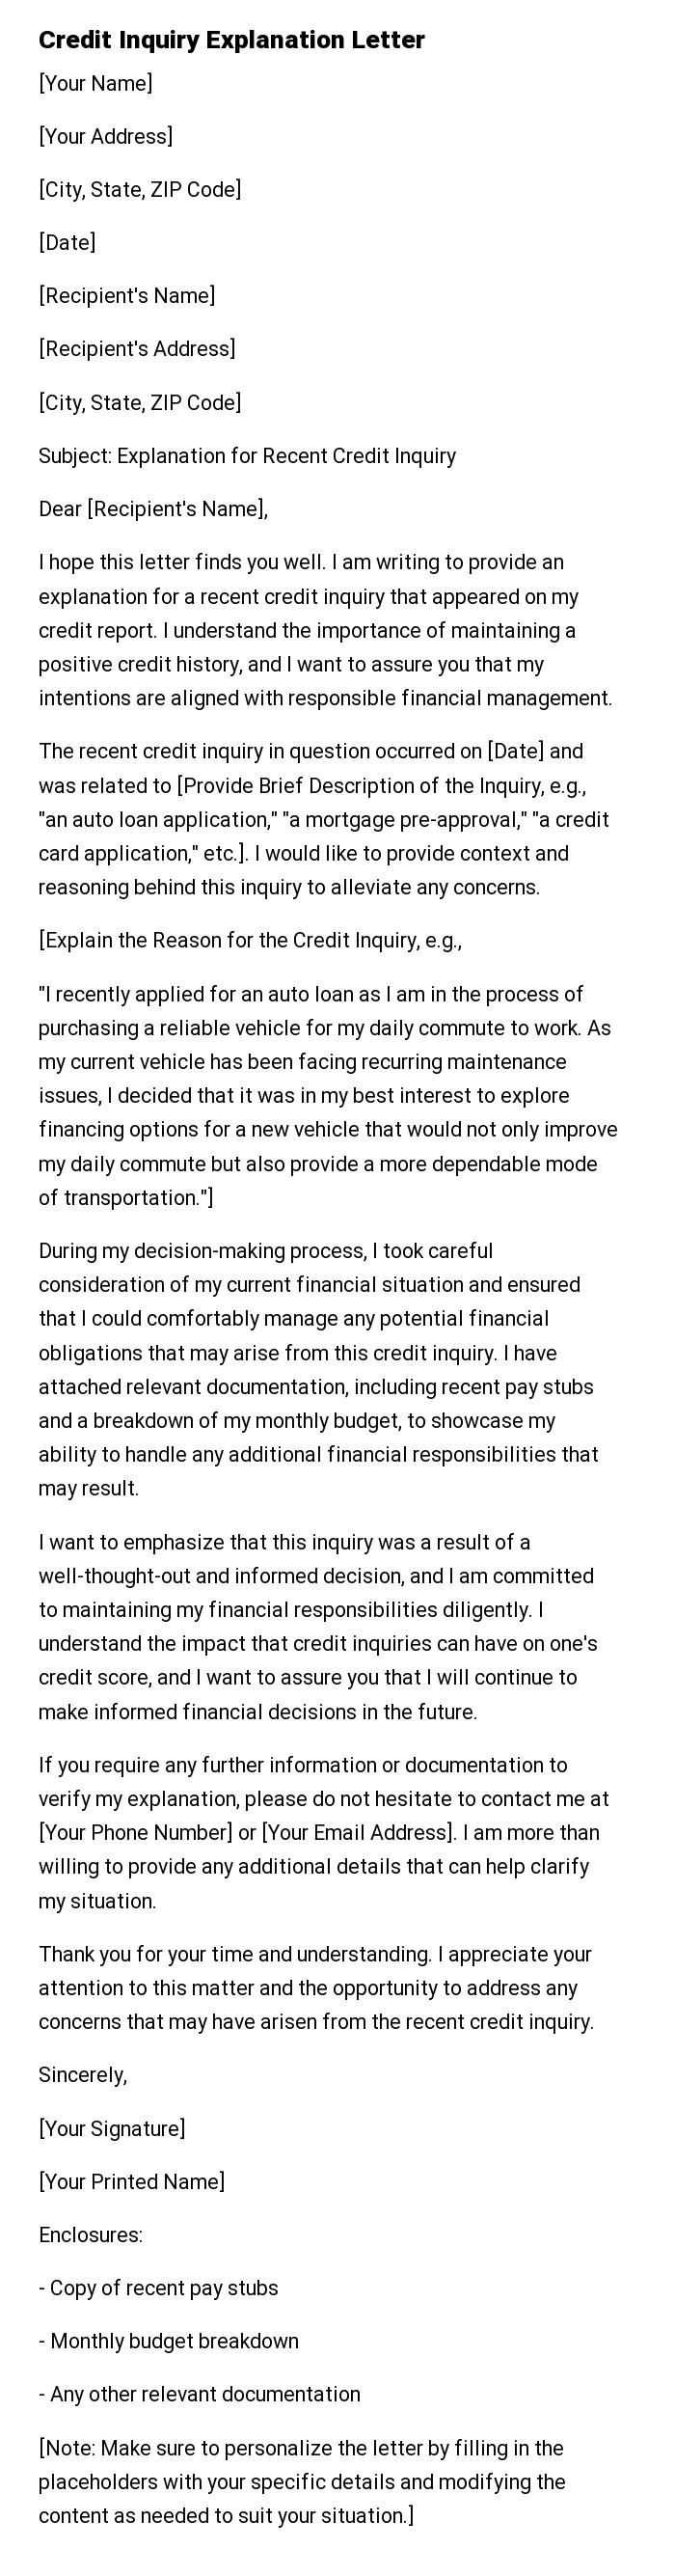 Credit Inquiry Explanation Letter